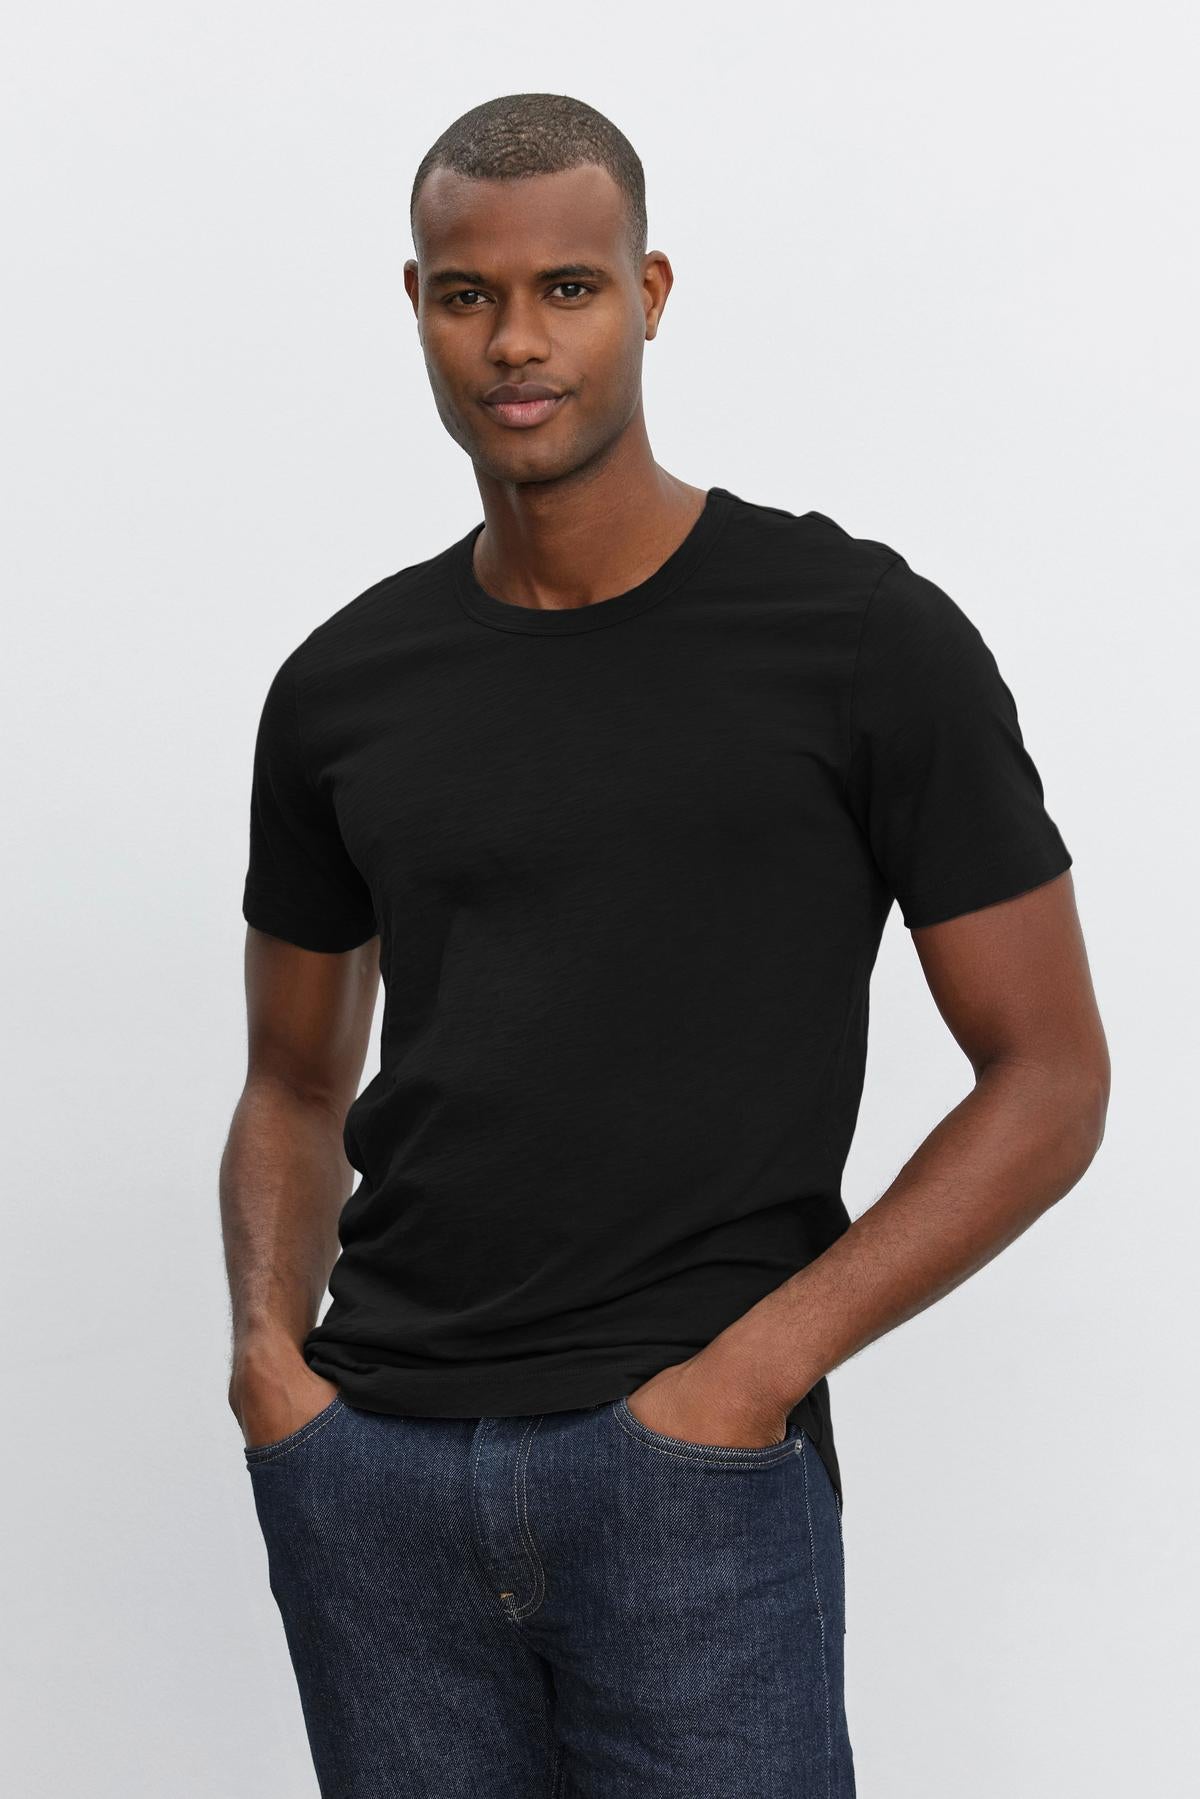   A man wearing a black AMARO CREW NECK SLUB TEE by Velvet by Graham & Spencer and jeans. 